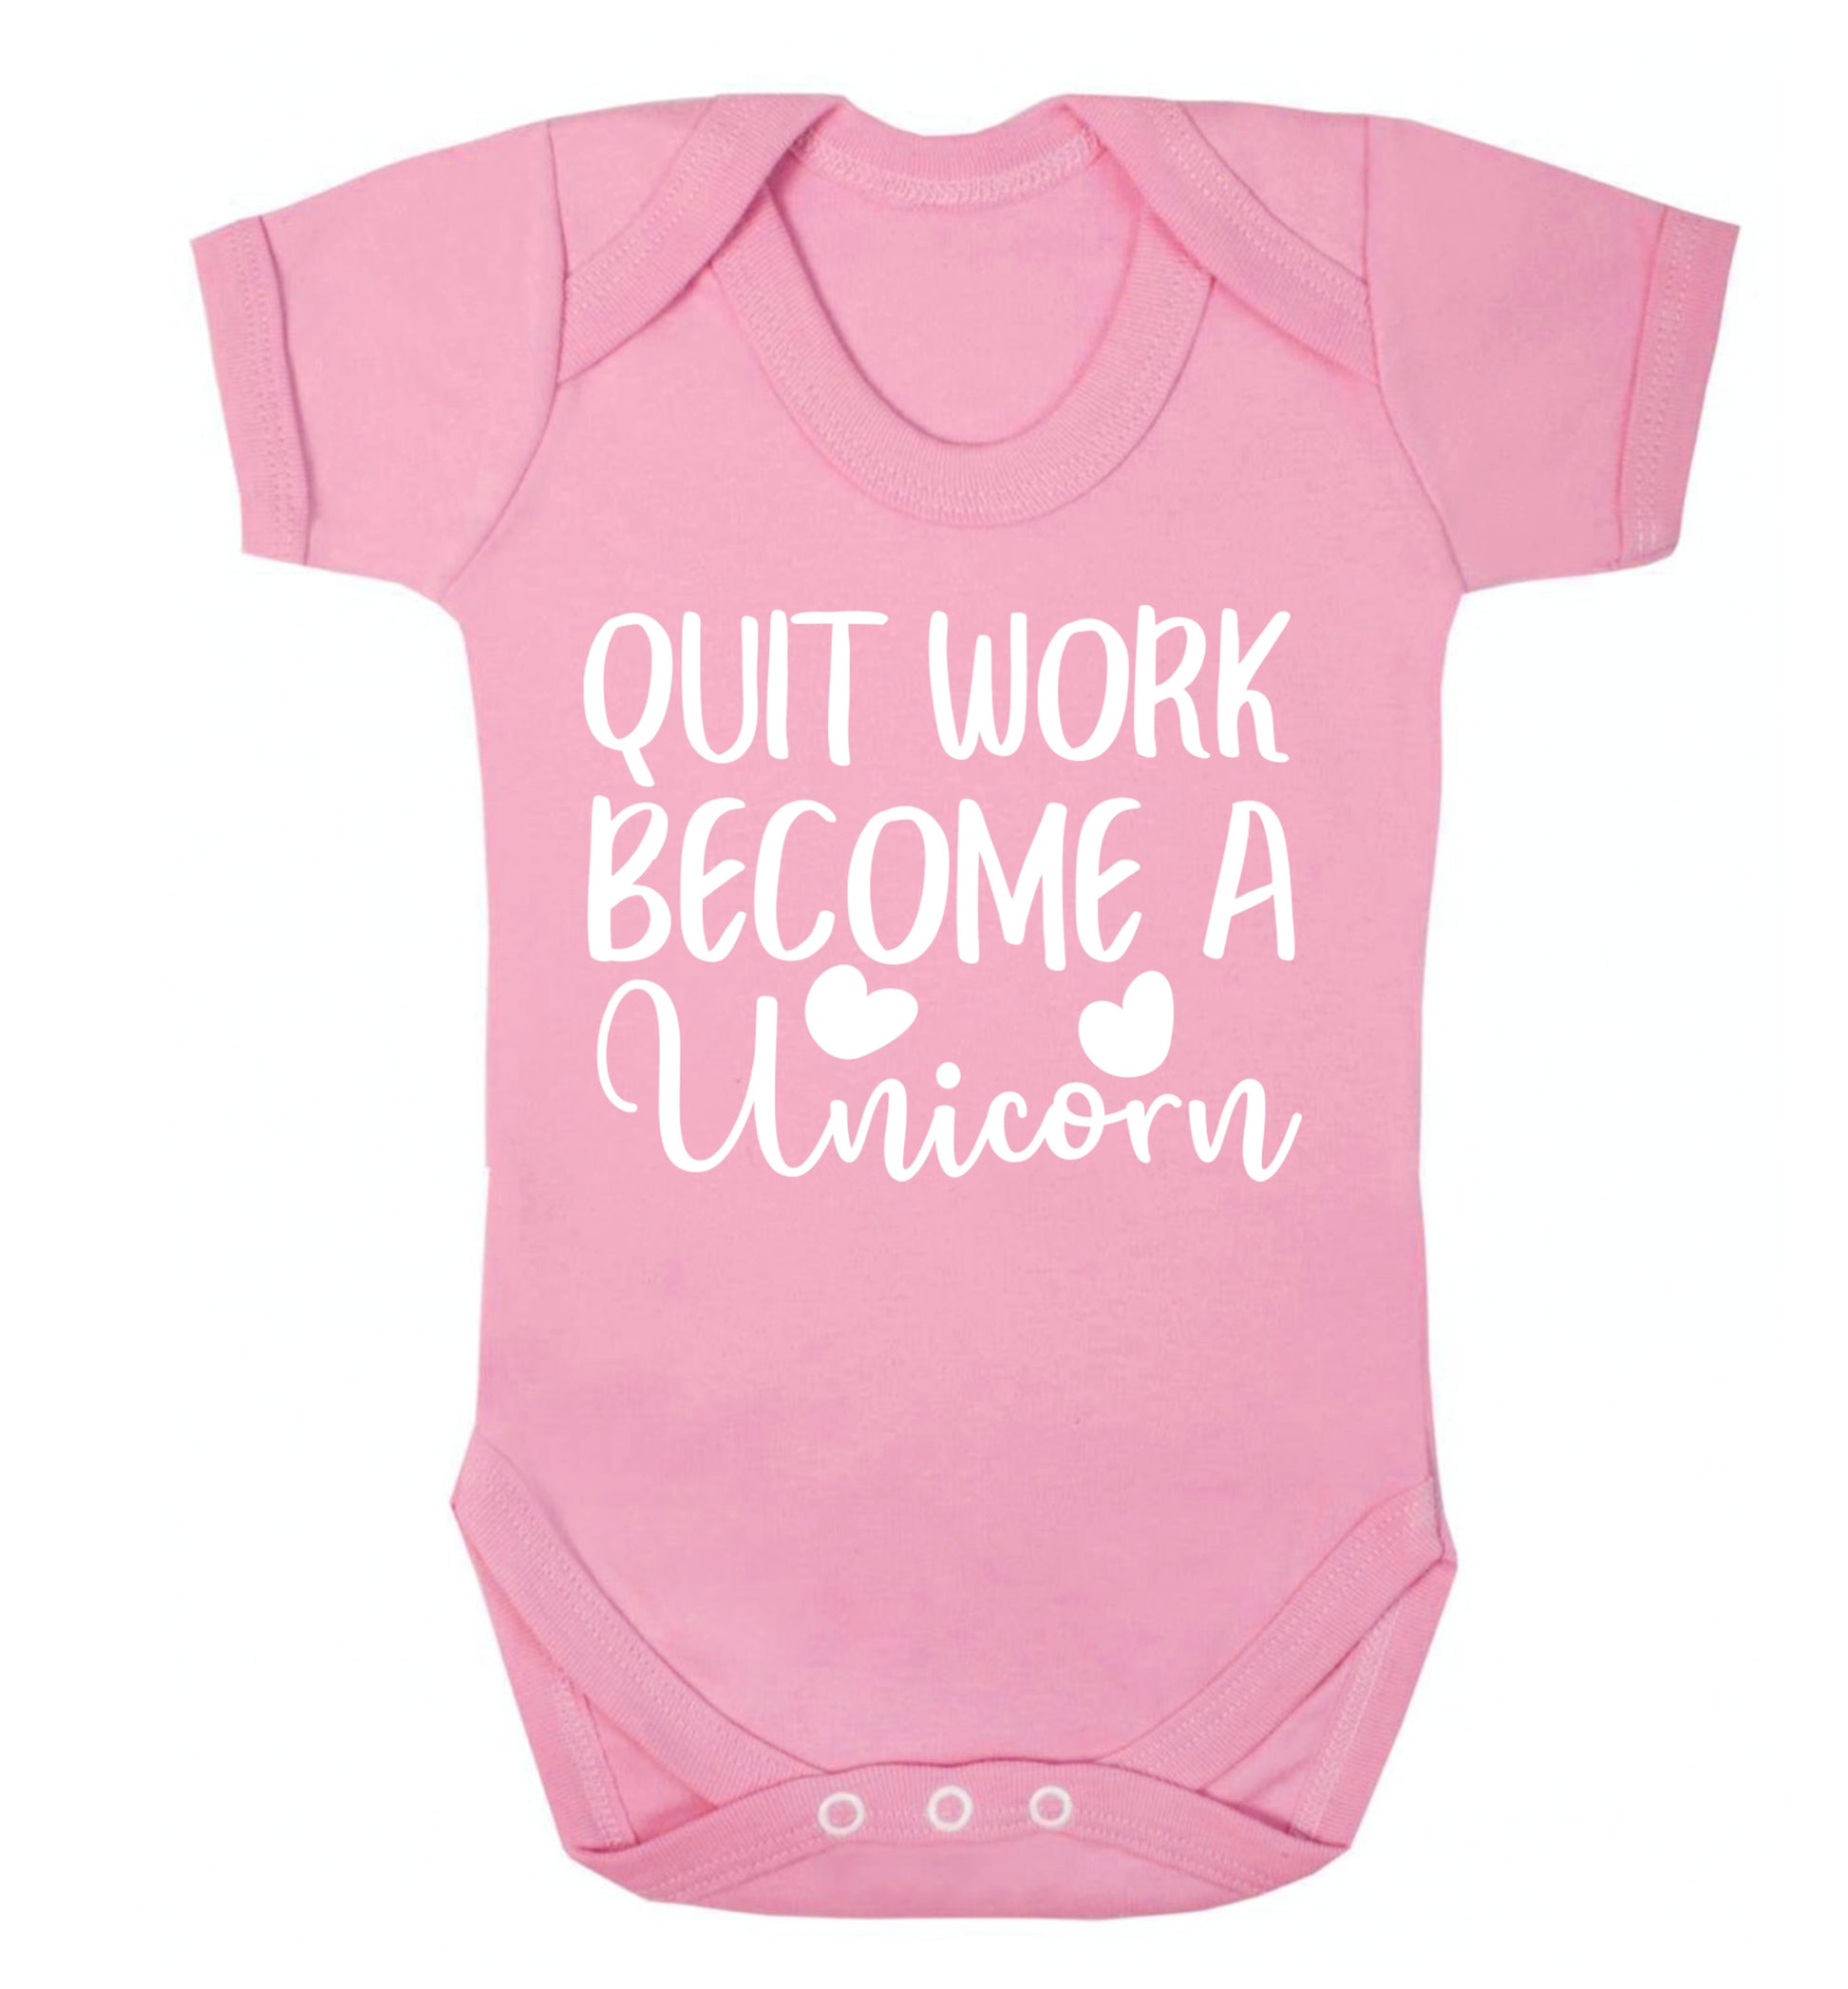 Quit work become a unicorn Baby Vest pale pink 18-24 months